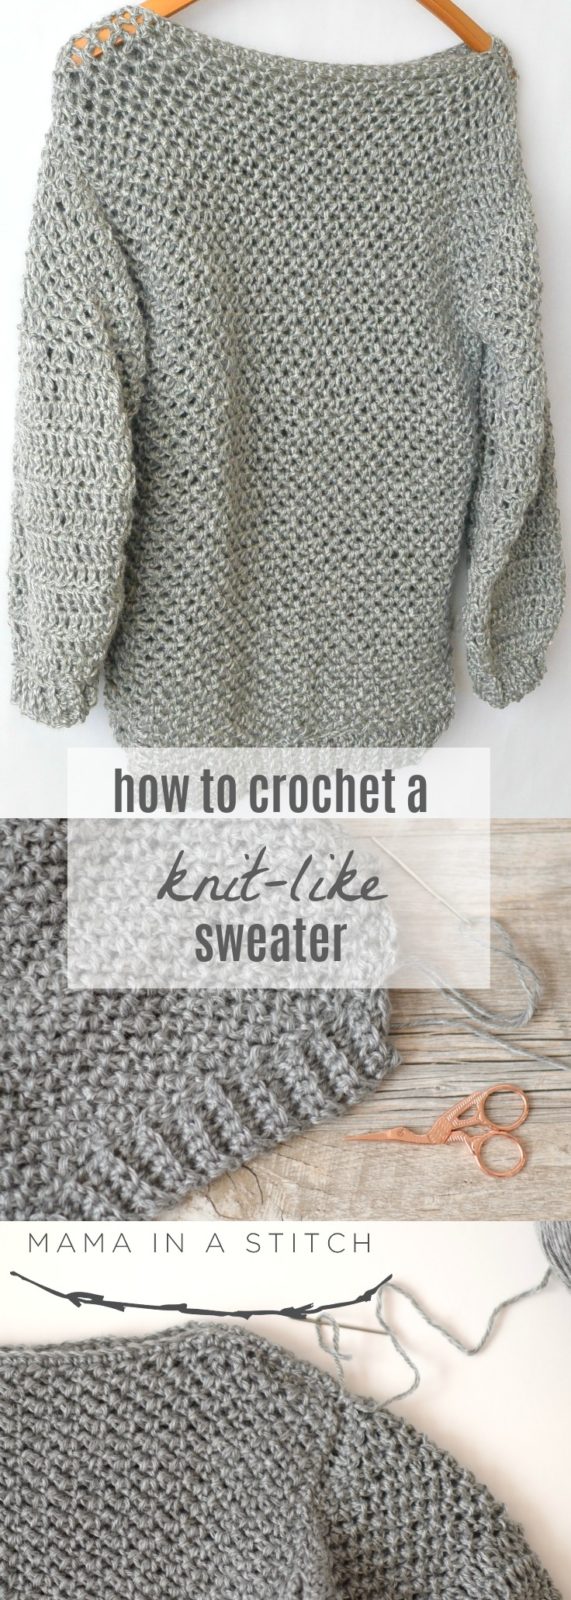 How To Make An Easy Crocheted Sweater Knit Like Mama In